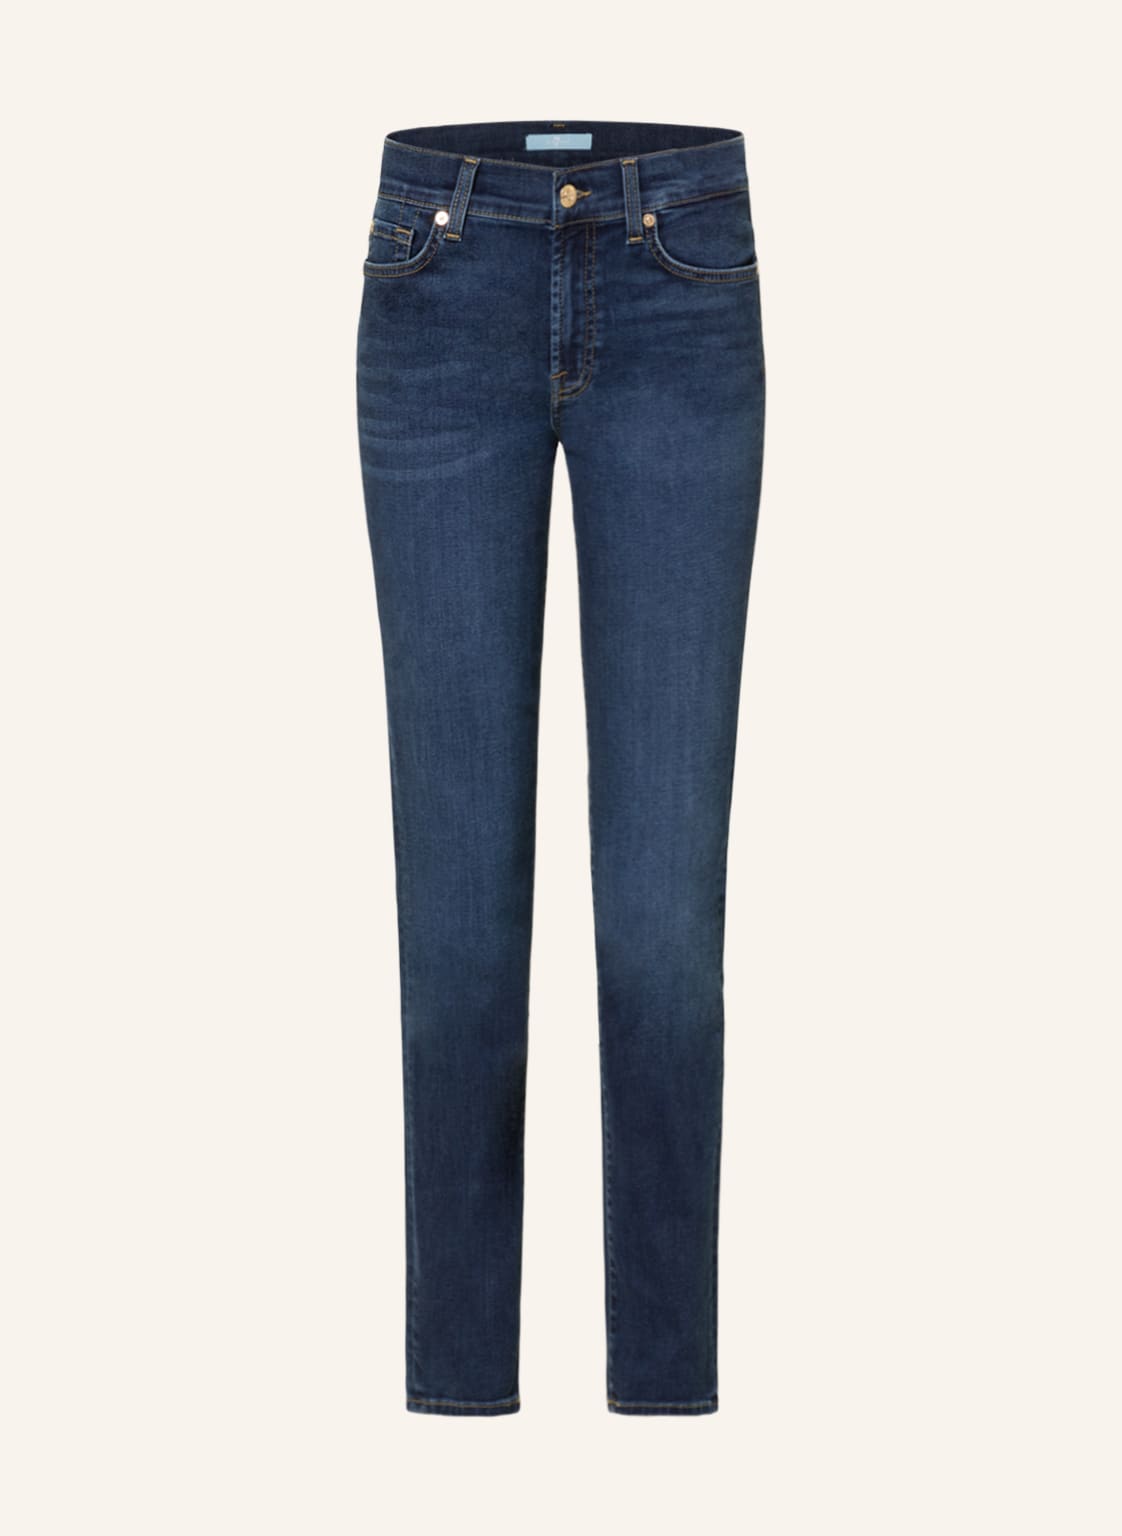 7 For All Mankind Skinny Jeans Roxanne blau von 7 For All Mankind